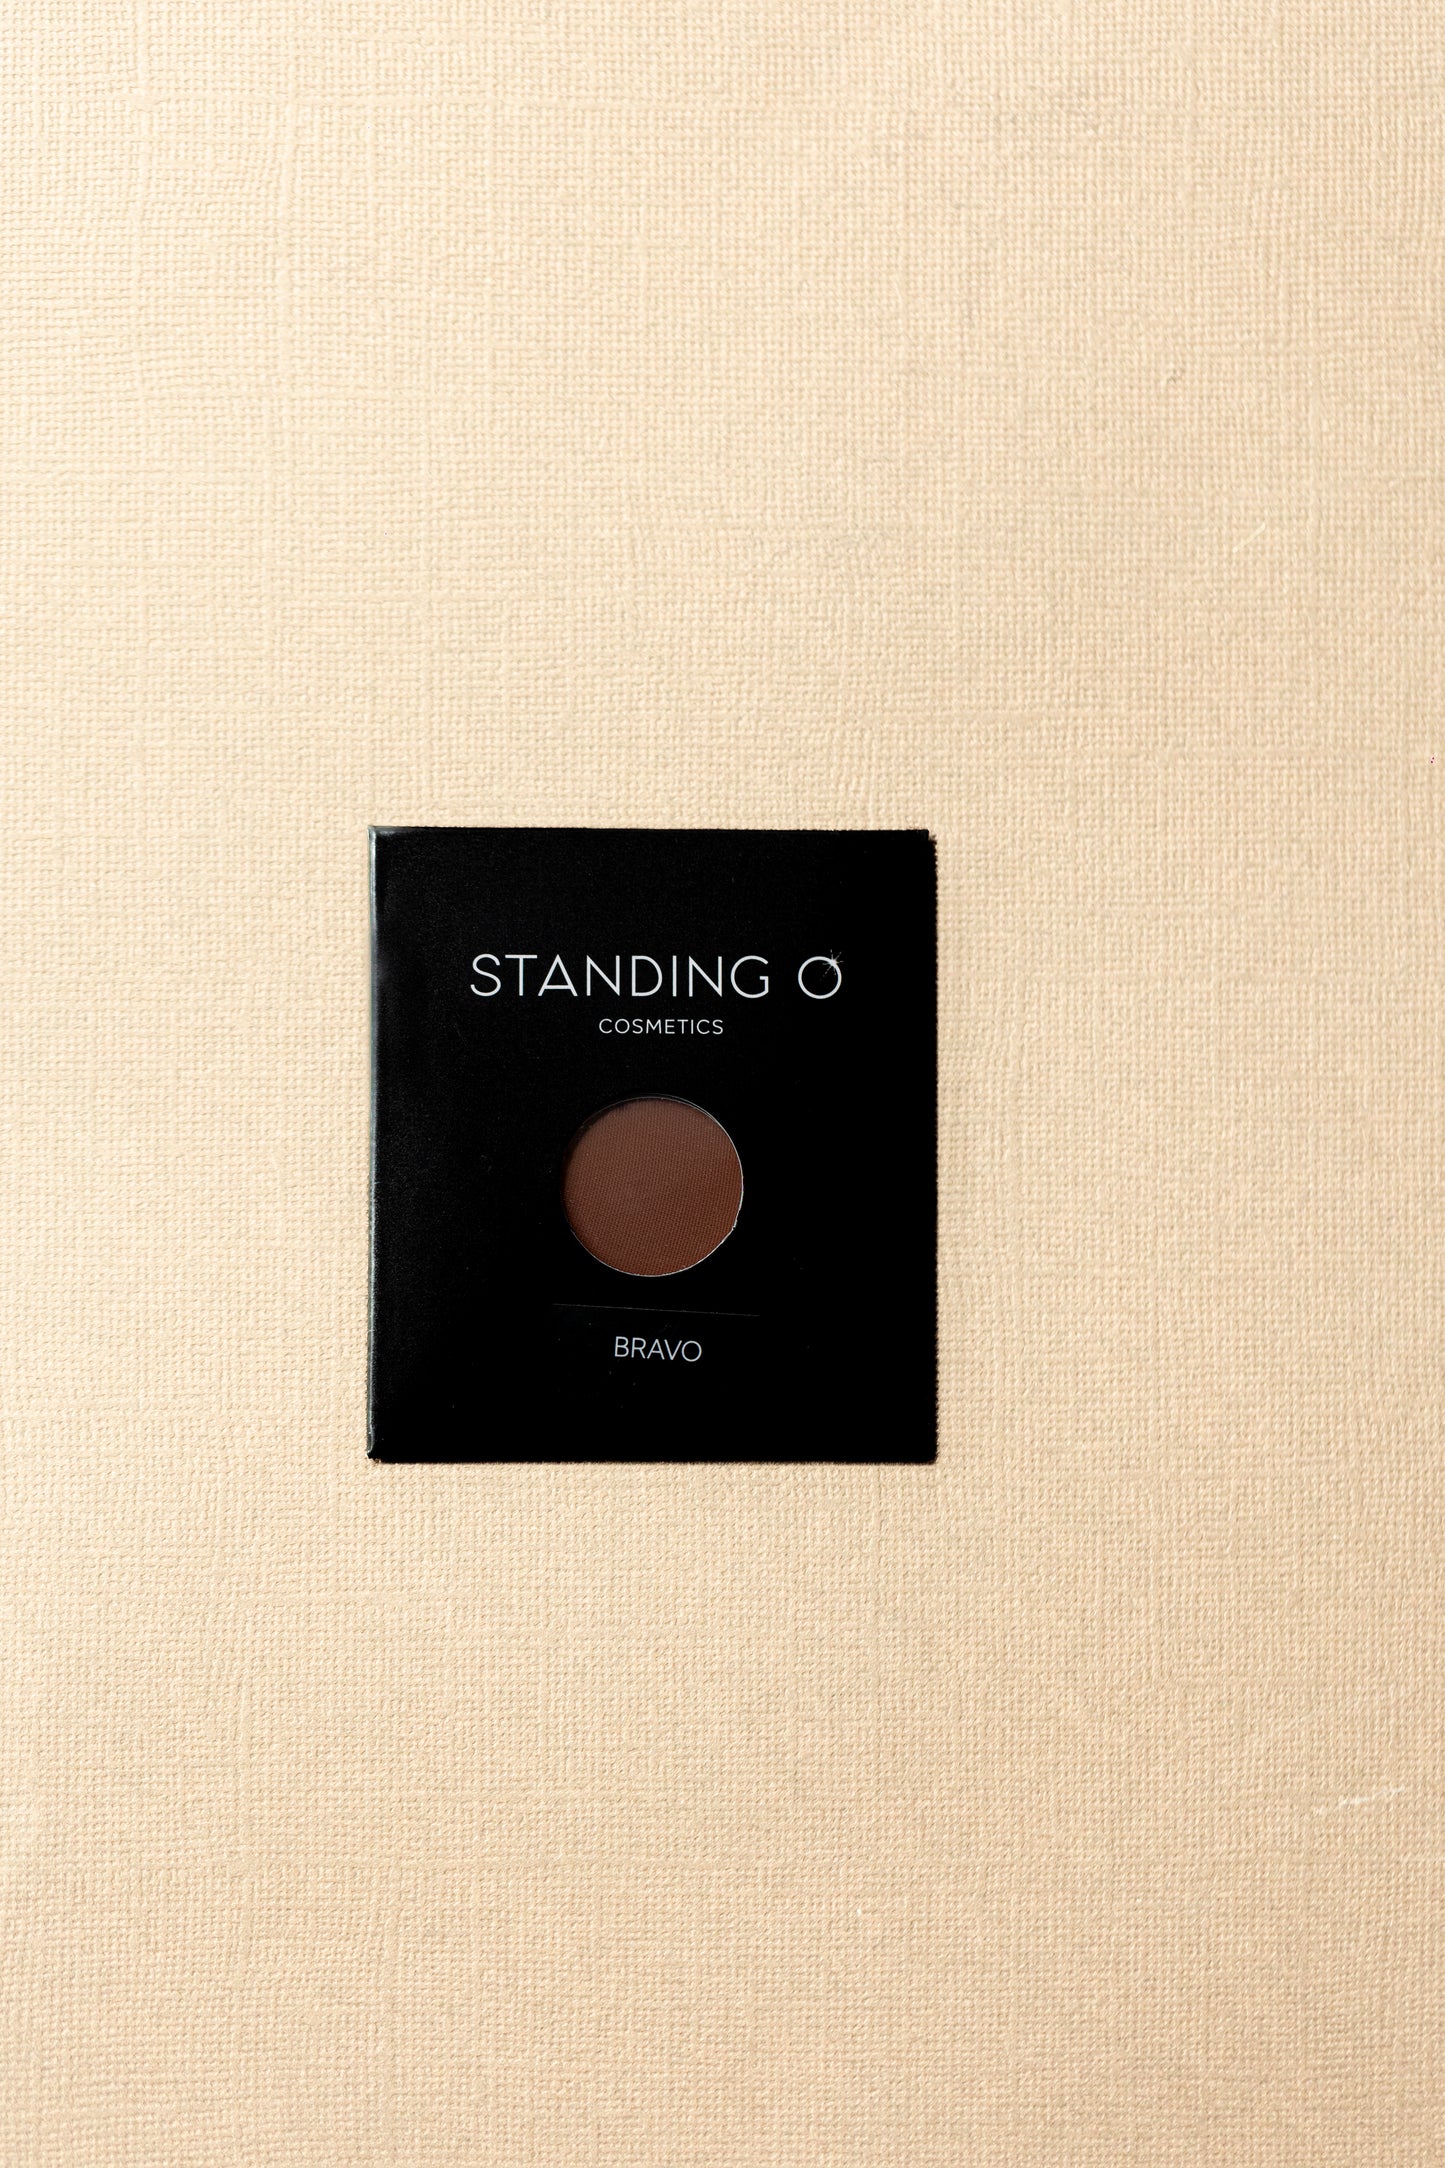 Discover the allure of 'Standing O' single eyeshadow in 'Bravo', offering a rich brown color payoff.